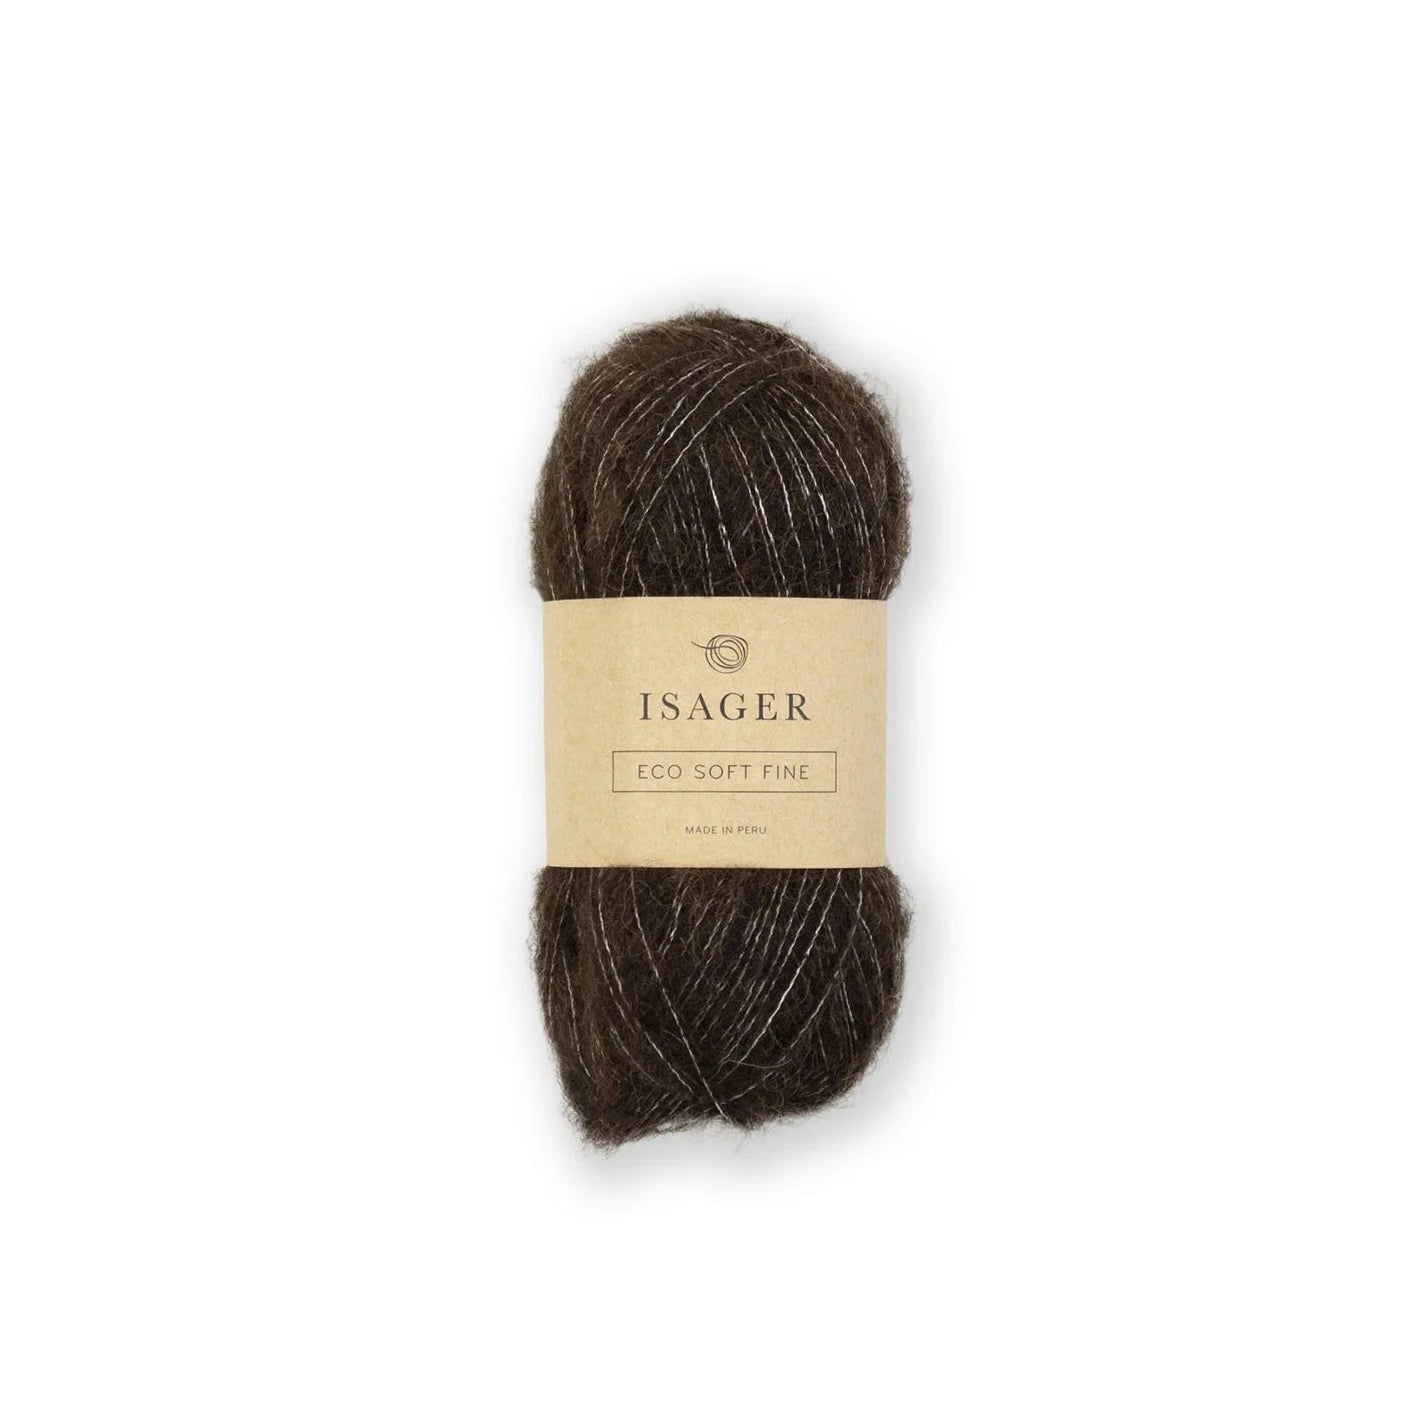 Isager Soft Fine - Isager - E8s - The Little Yarn Store